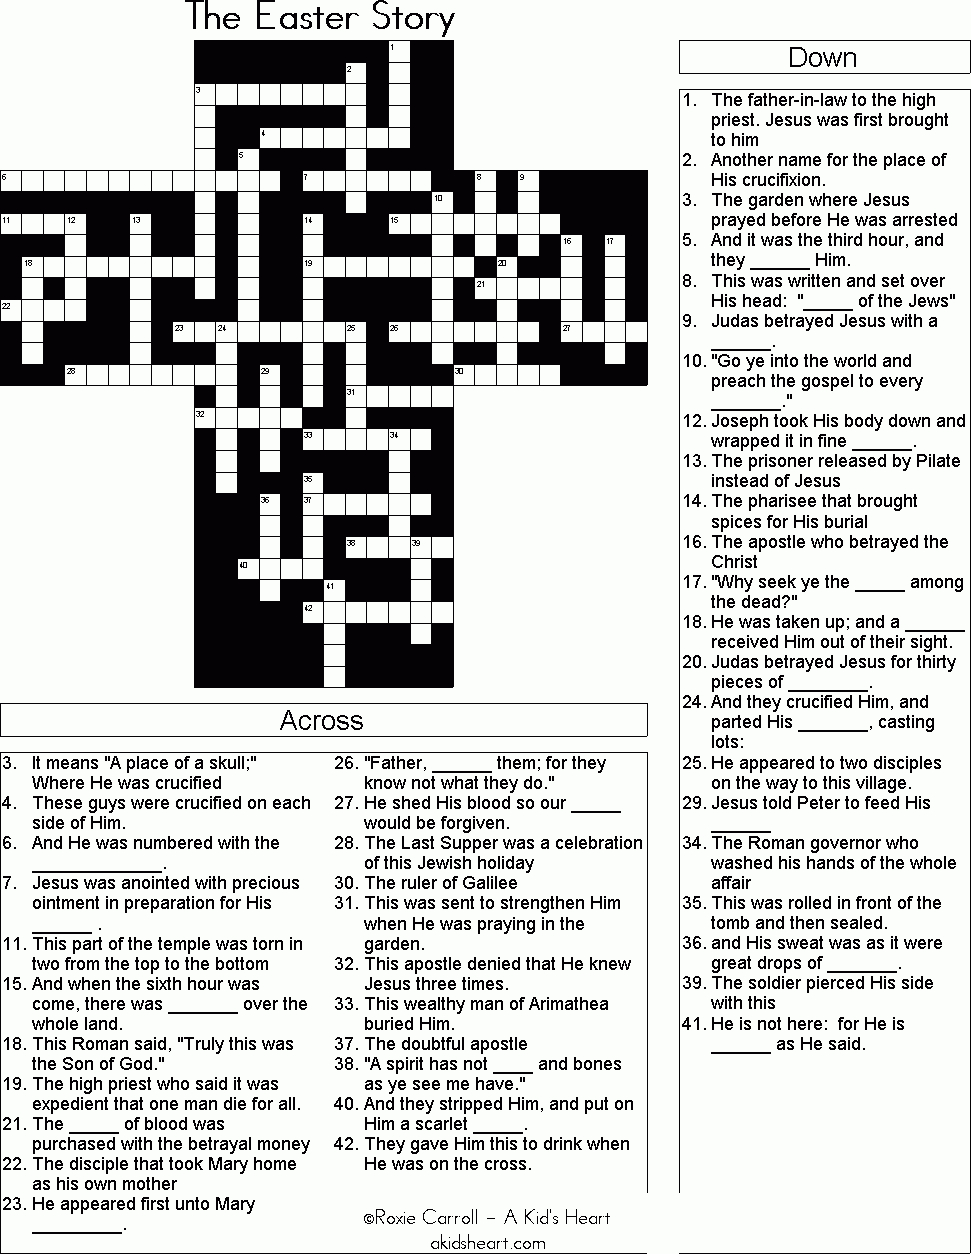 The Easter Story Crossword Puzzle | Bible Crosswords/word Search - Bible Crossword Puzzles Printable With Answers